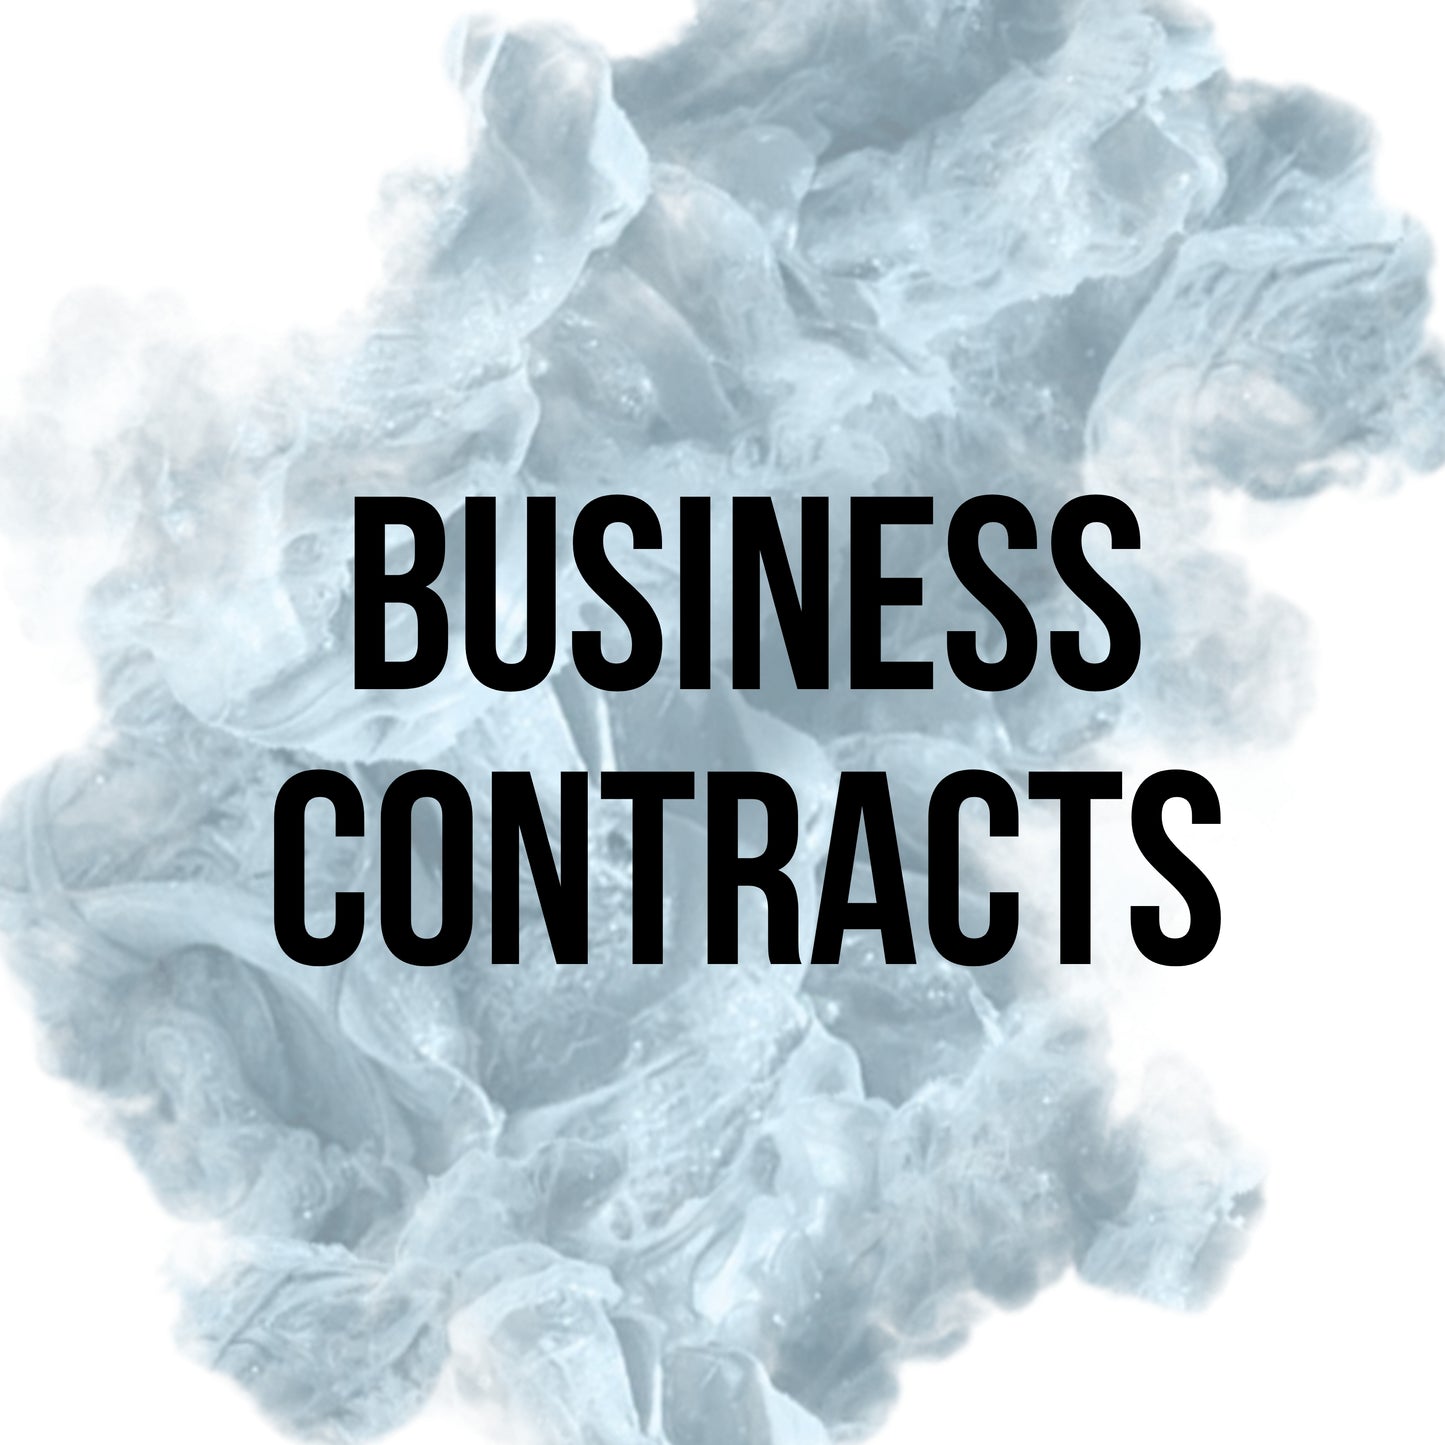 BUSINESS CONTRACTS